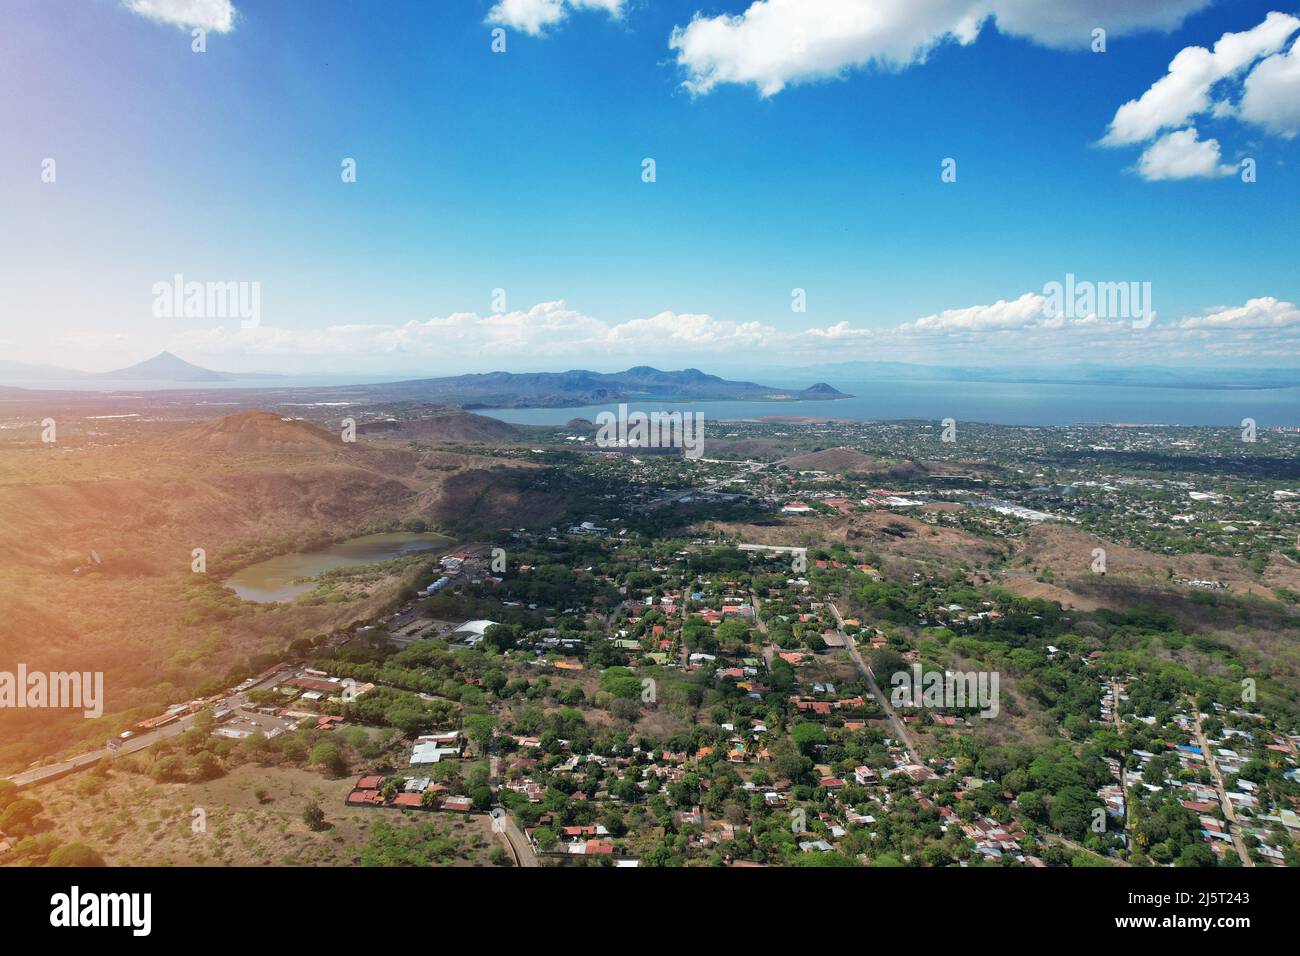 Nicaragua landscape scenery aerial drone view on bright sunny day Stock Photo